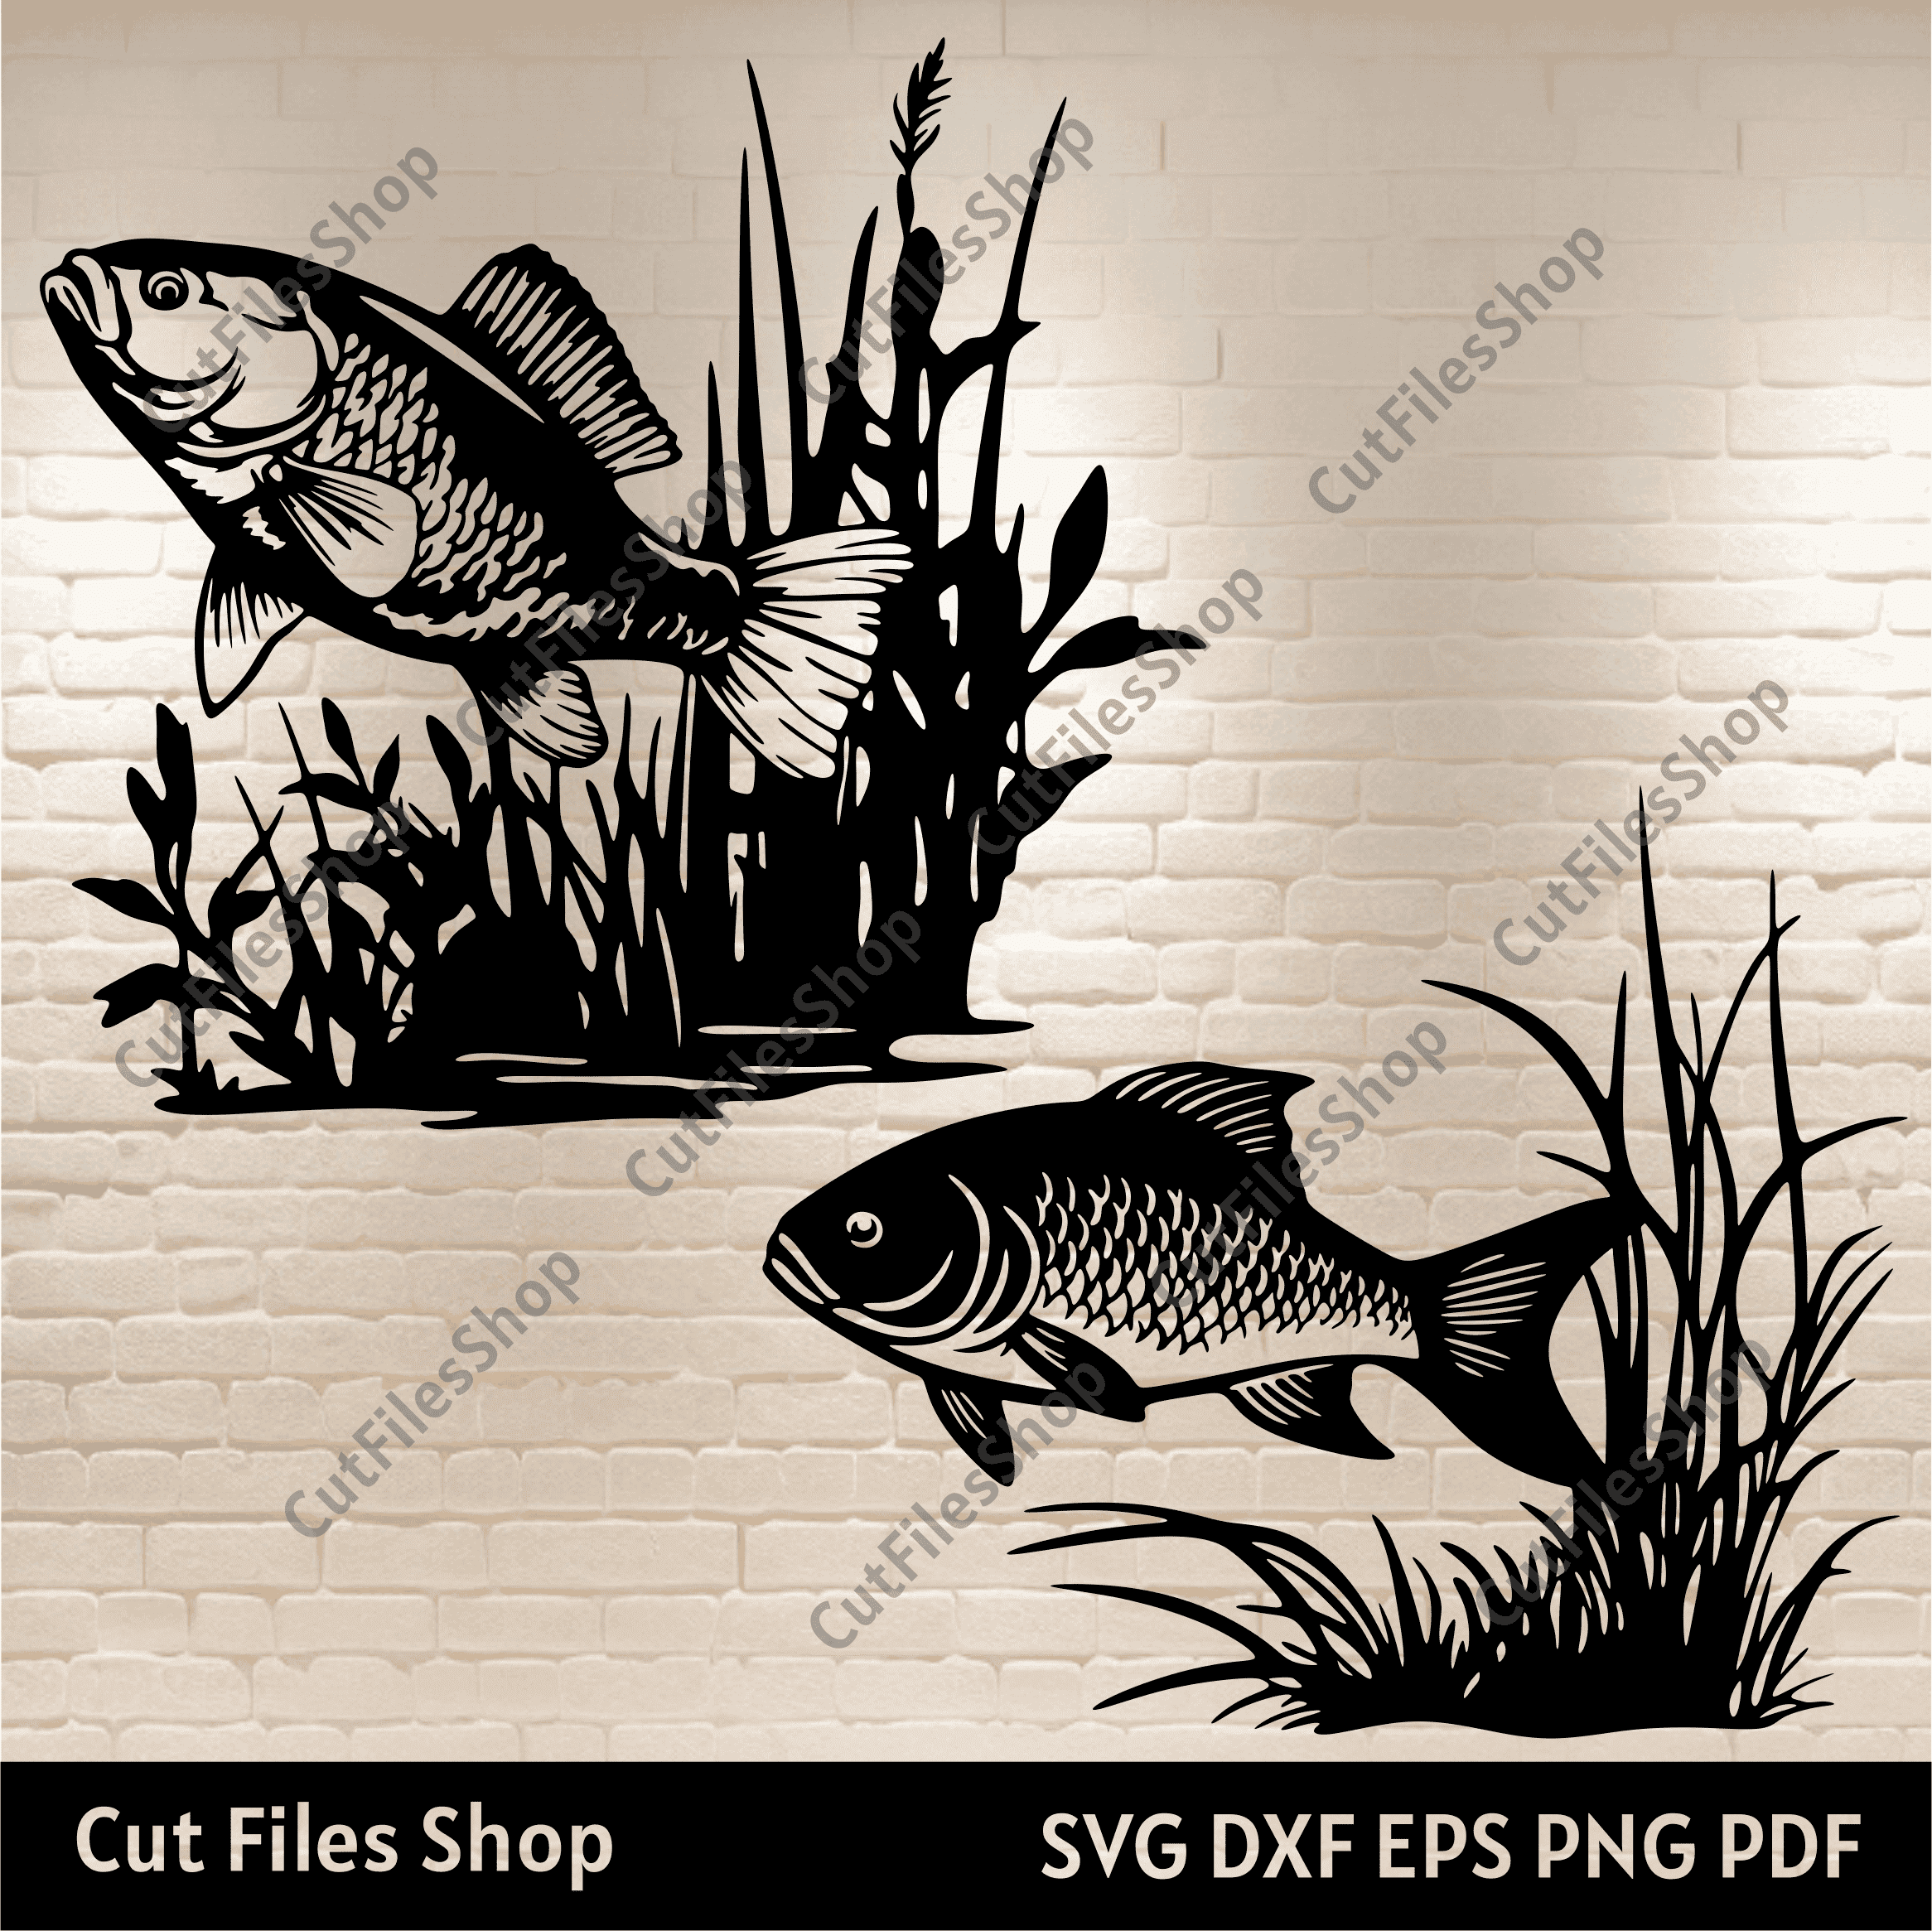 Fish scene Svg, Fishing Dxf, perch fish svg, Dxf for Cnc Router, Wall metal  decor dxf, underwater life svg – Cut Files Shop